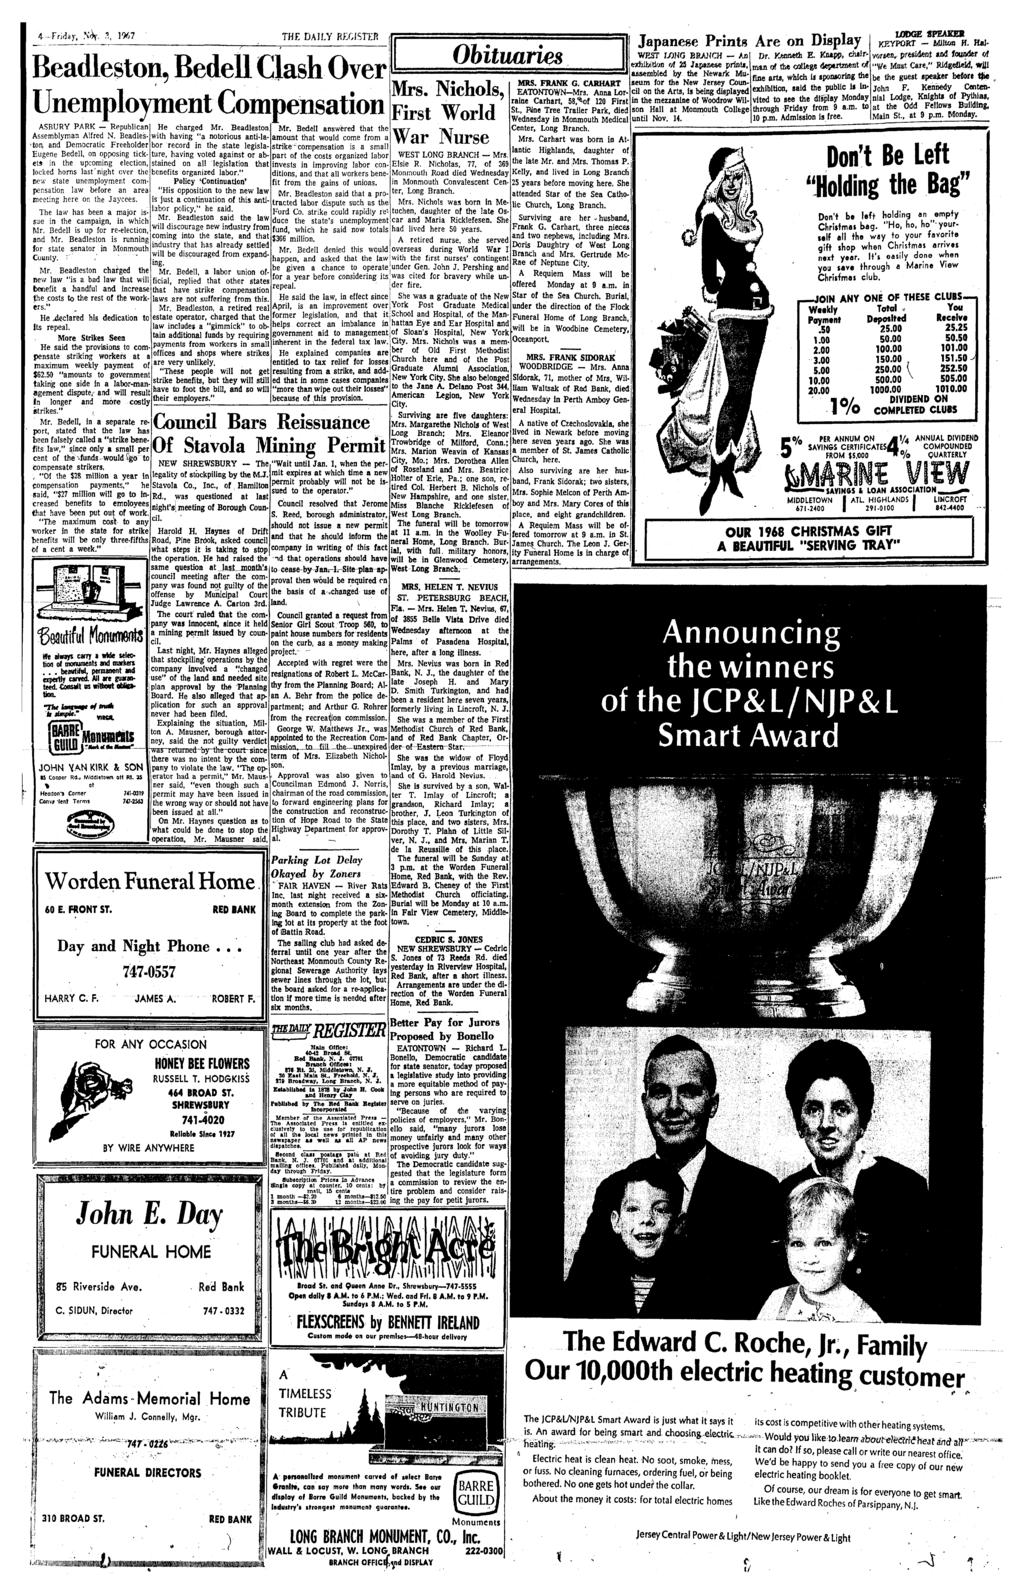 4 Friday. N^i-. 3, 1967 THE DAILY REGISTER Beadleston, Bedell Clash Over Unemployment Compensation ASBURY PARK - Republican Assemblyman Alfred N.